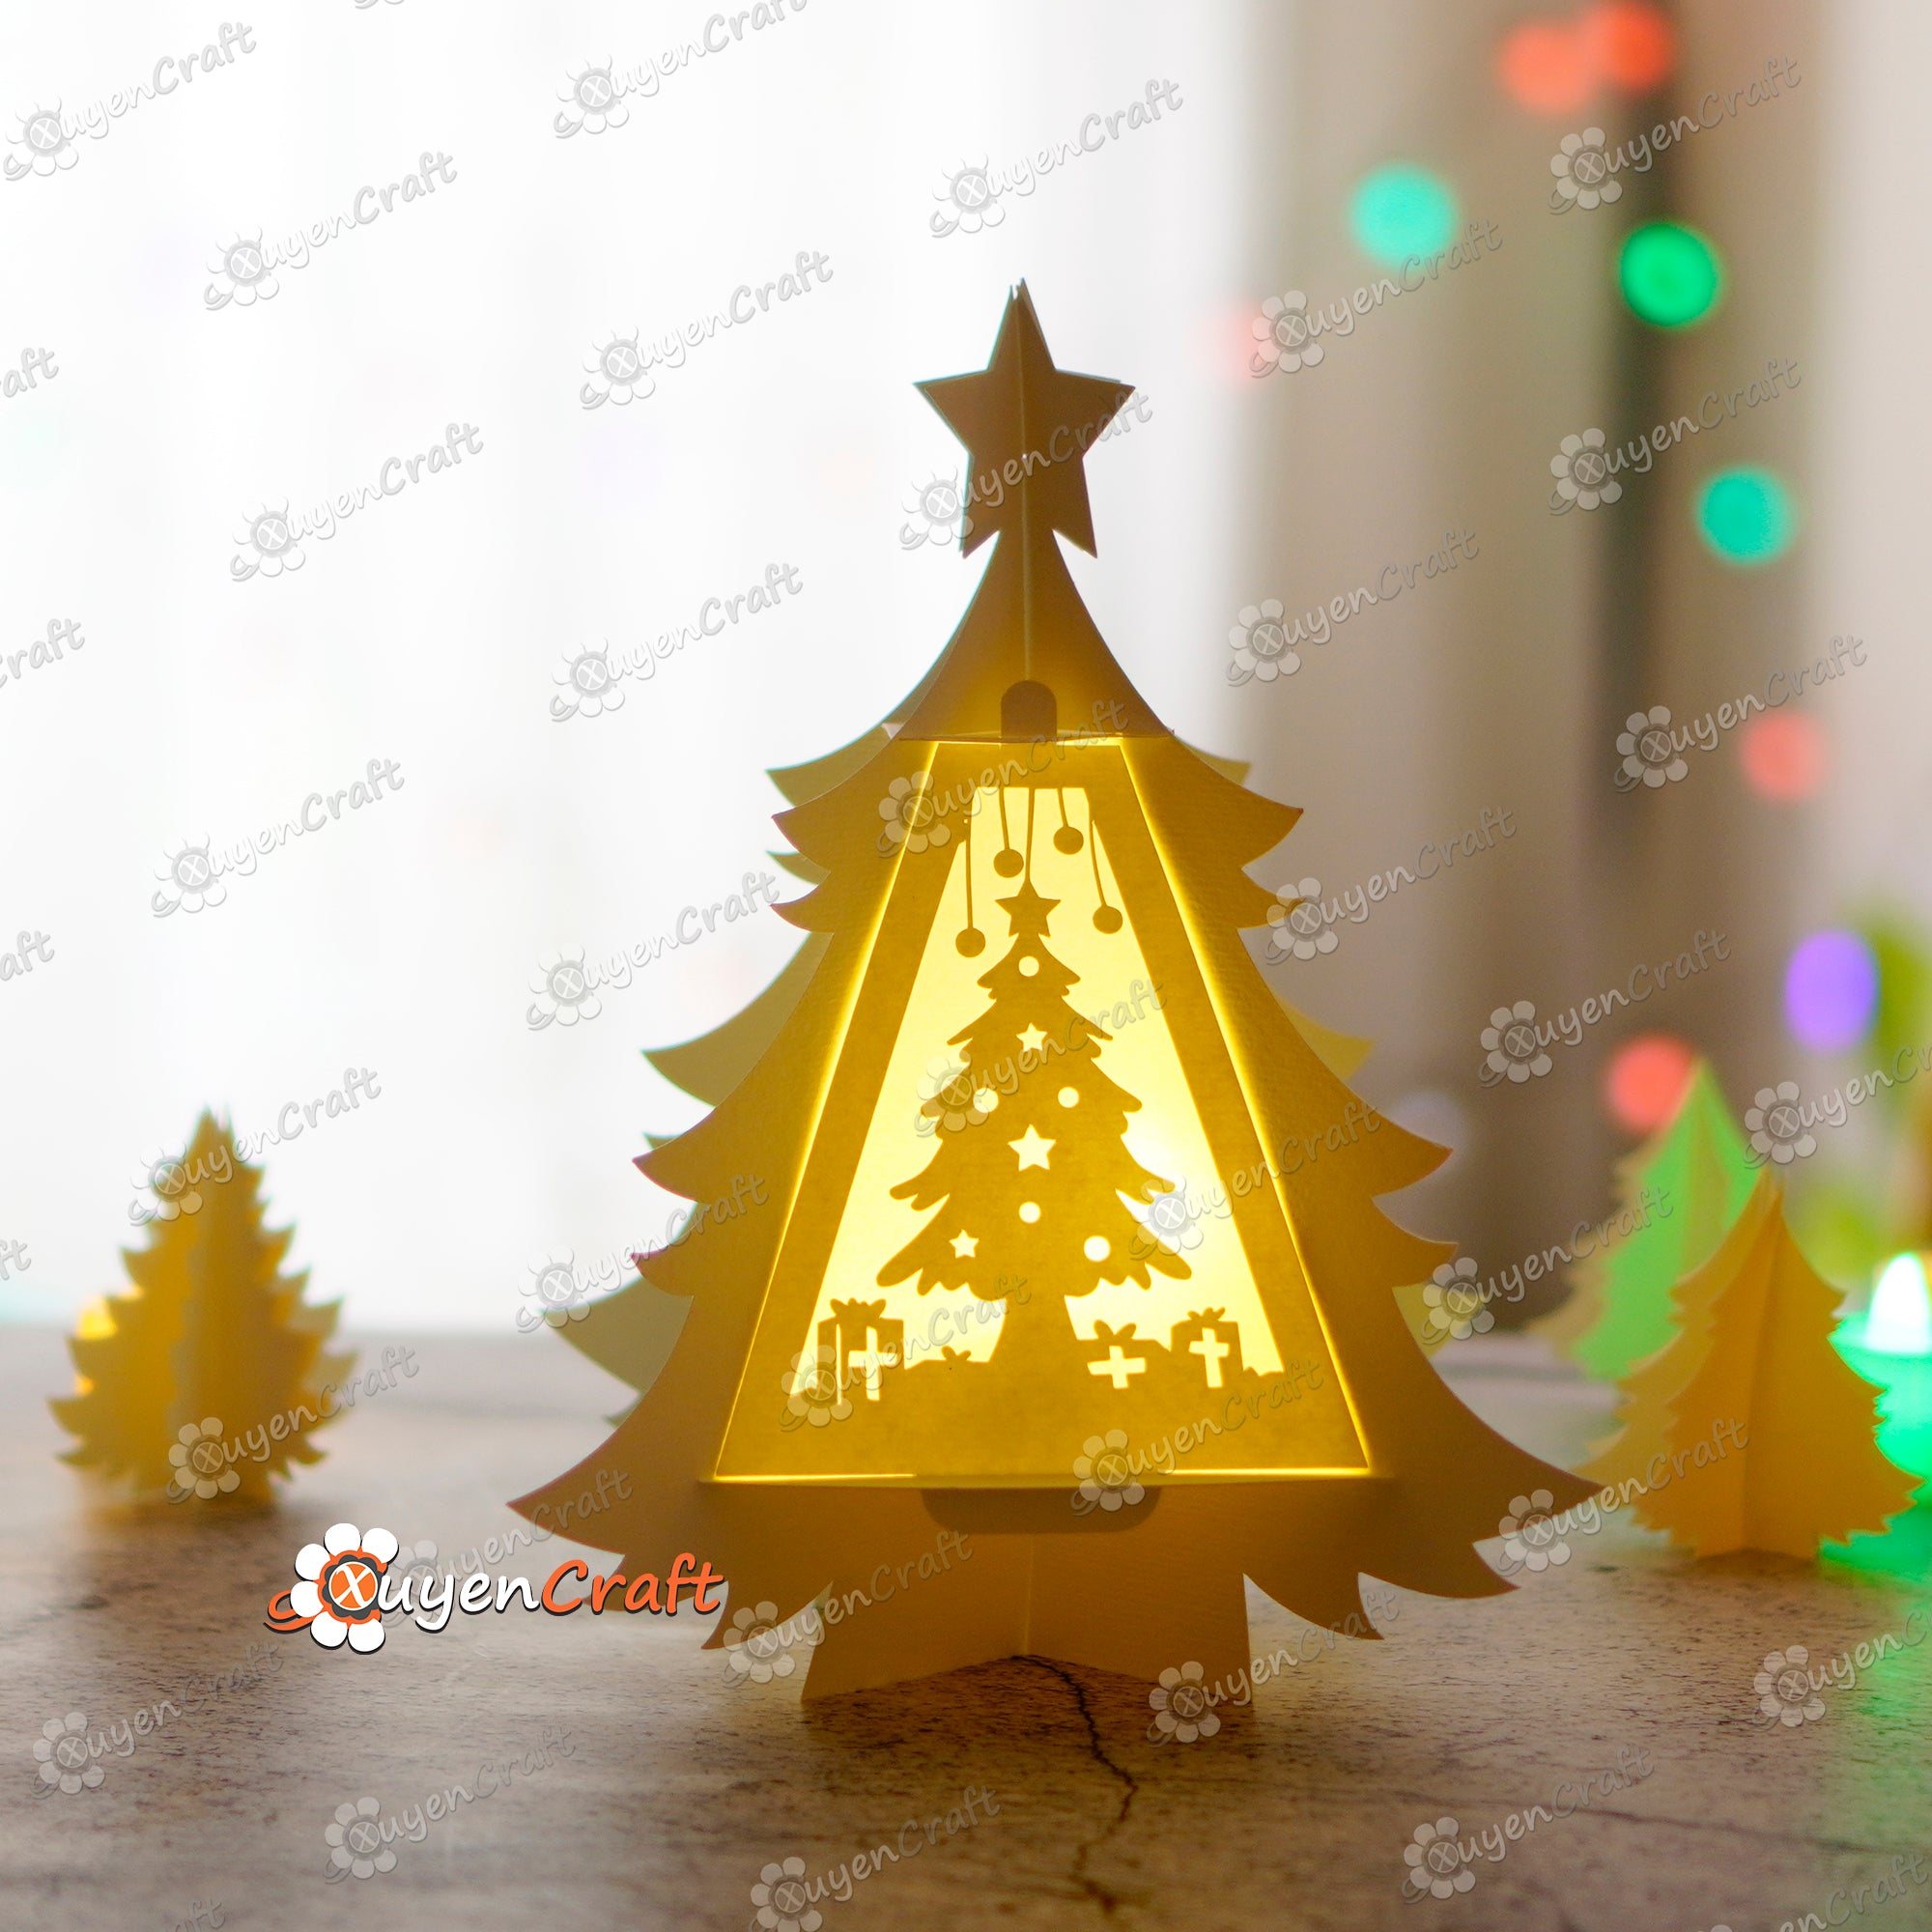 Deer Family Christmas Tree Lantern SVG for Cricut Projects - Paper Cut Template For Christmas